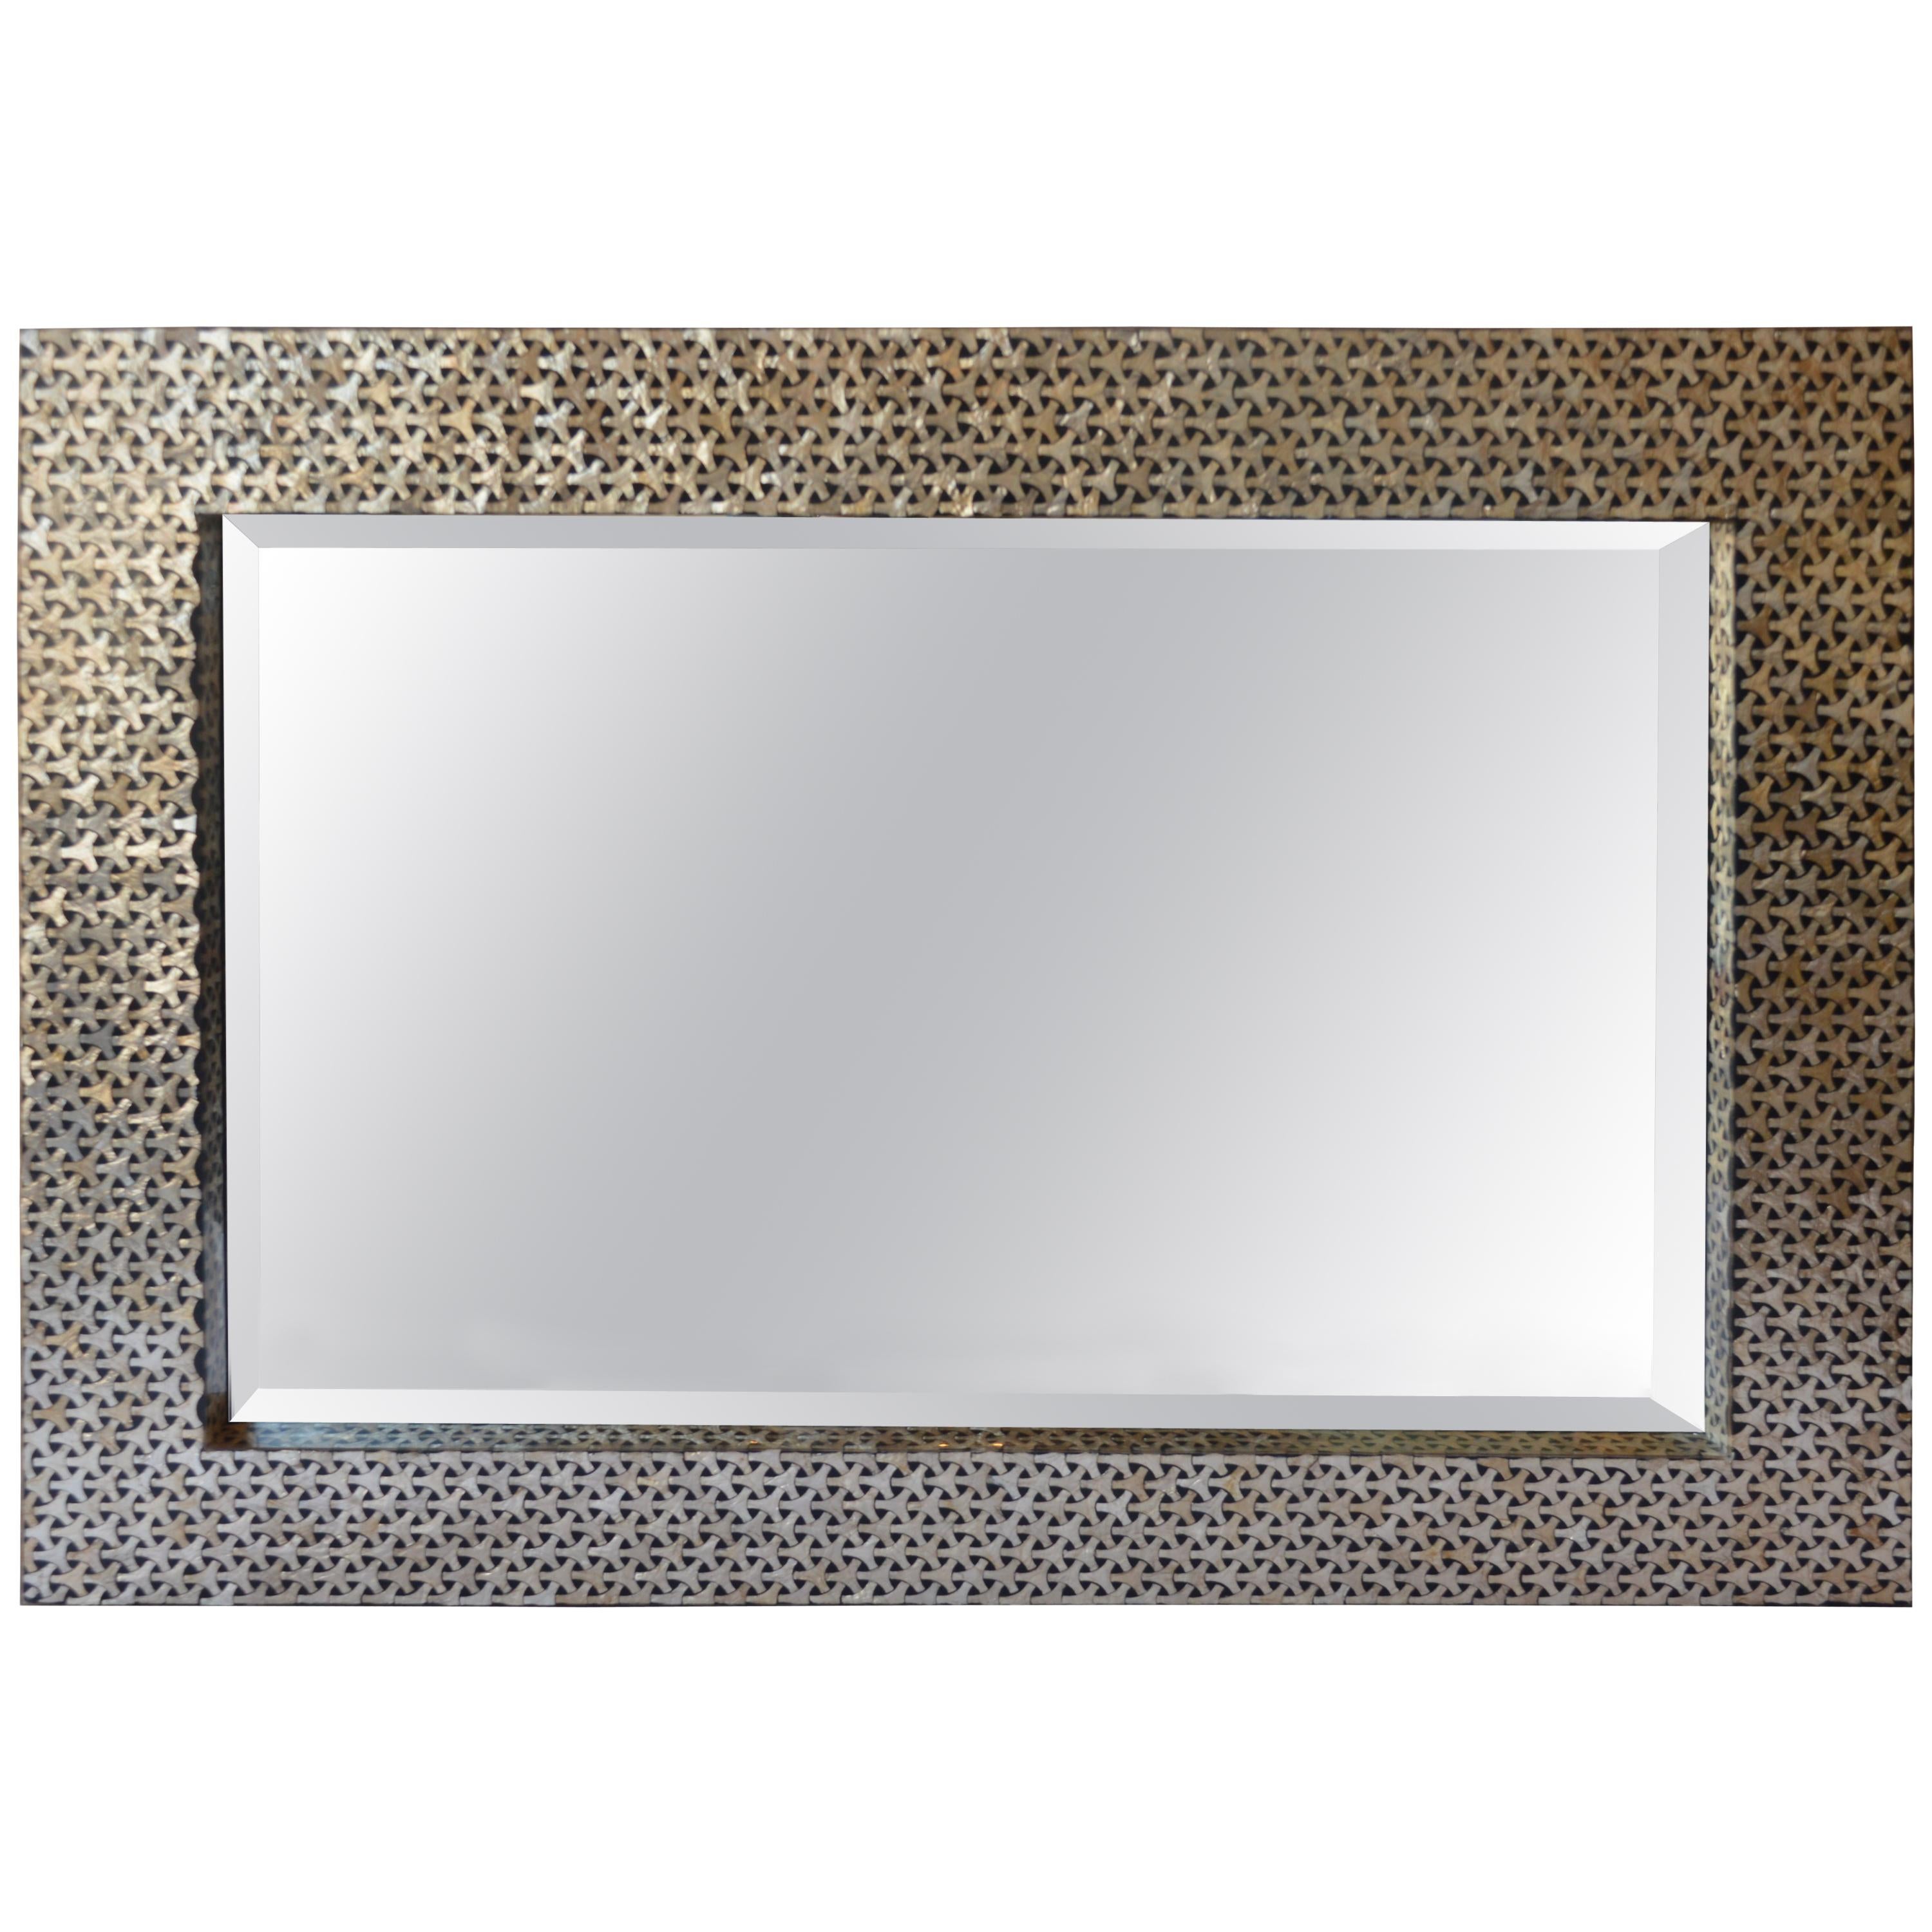 Black and Mother of Pearl Framed Mirror